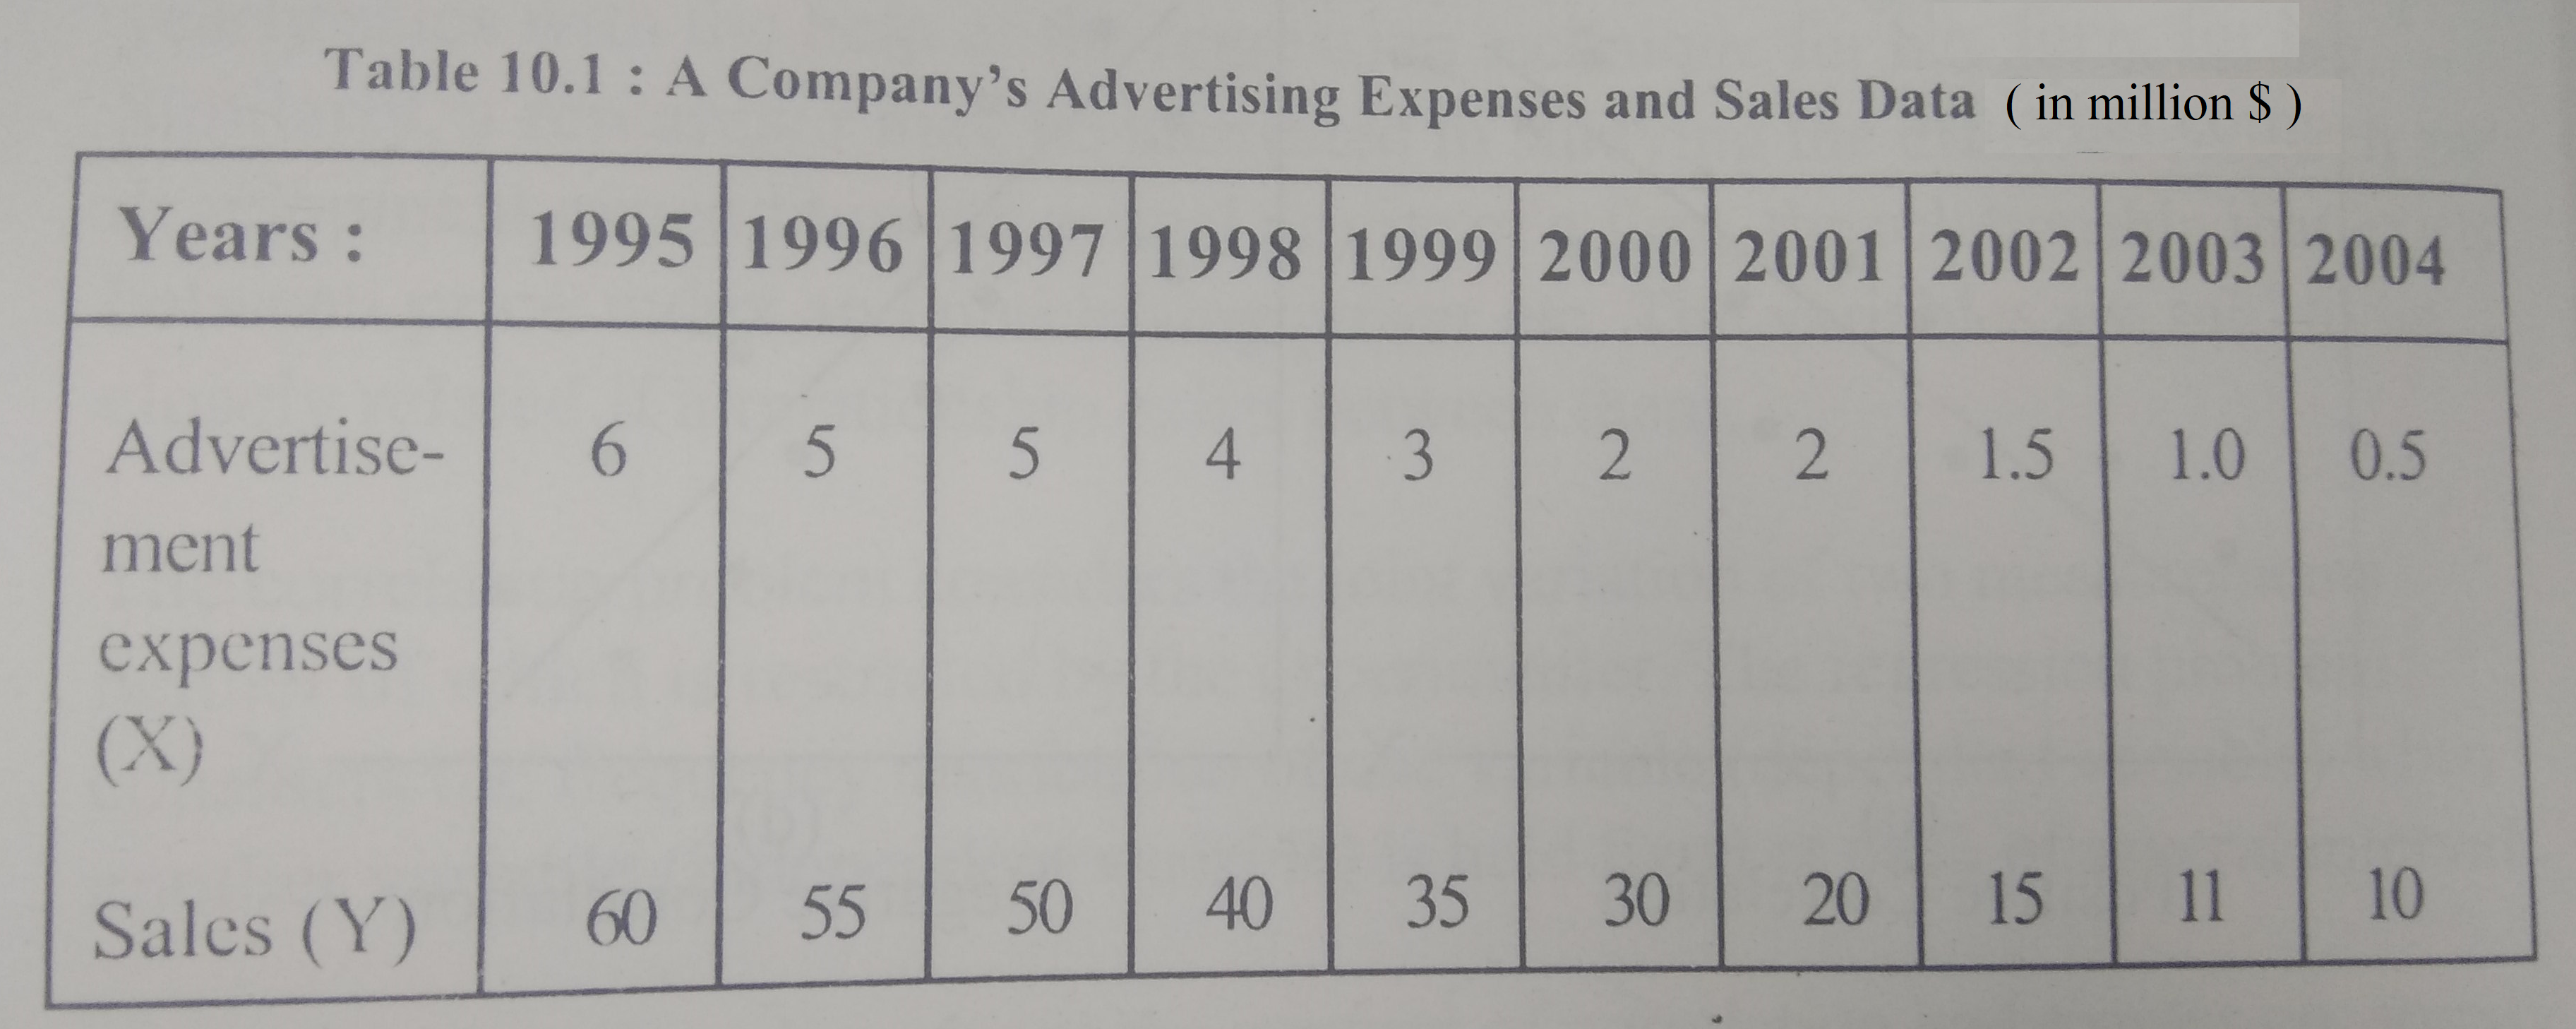 Table 10.1 : A Company's Advertising Expenses and Sales Data ( in million S)
[Years- 1995|1996|1997|1998 1999|2000|2001|2002|20013|2004
Advertise 6 5 5 4 3 2 2 1.5 1.0 0.5
ment
expenses
Sales (Y) 60 5 50 40 35 30 20 15 11 10
